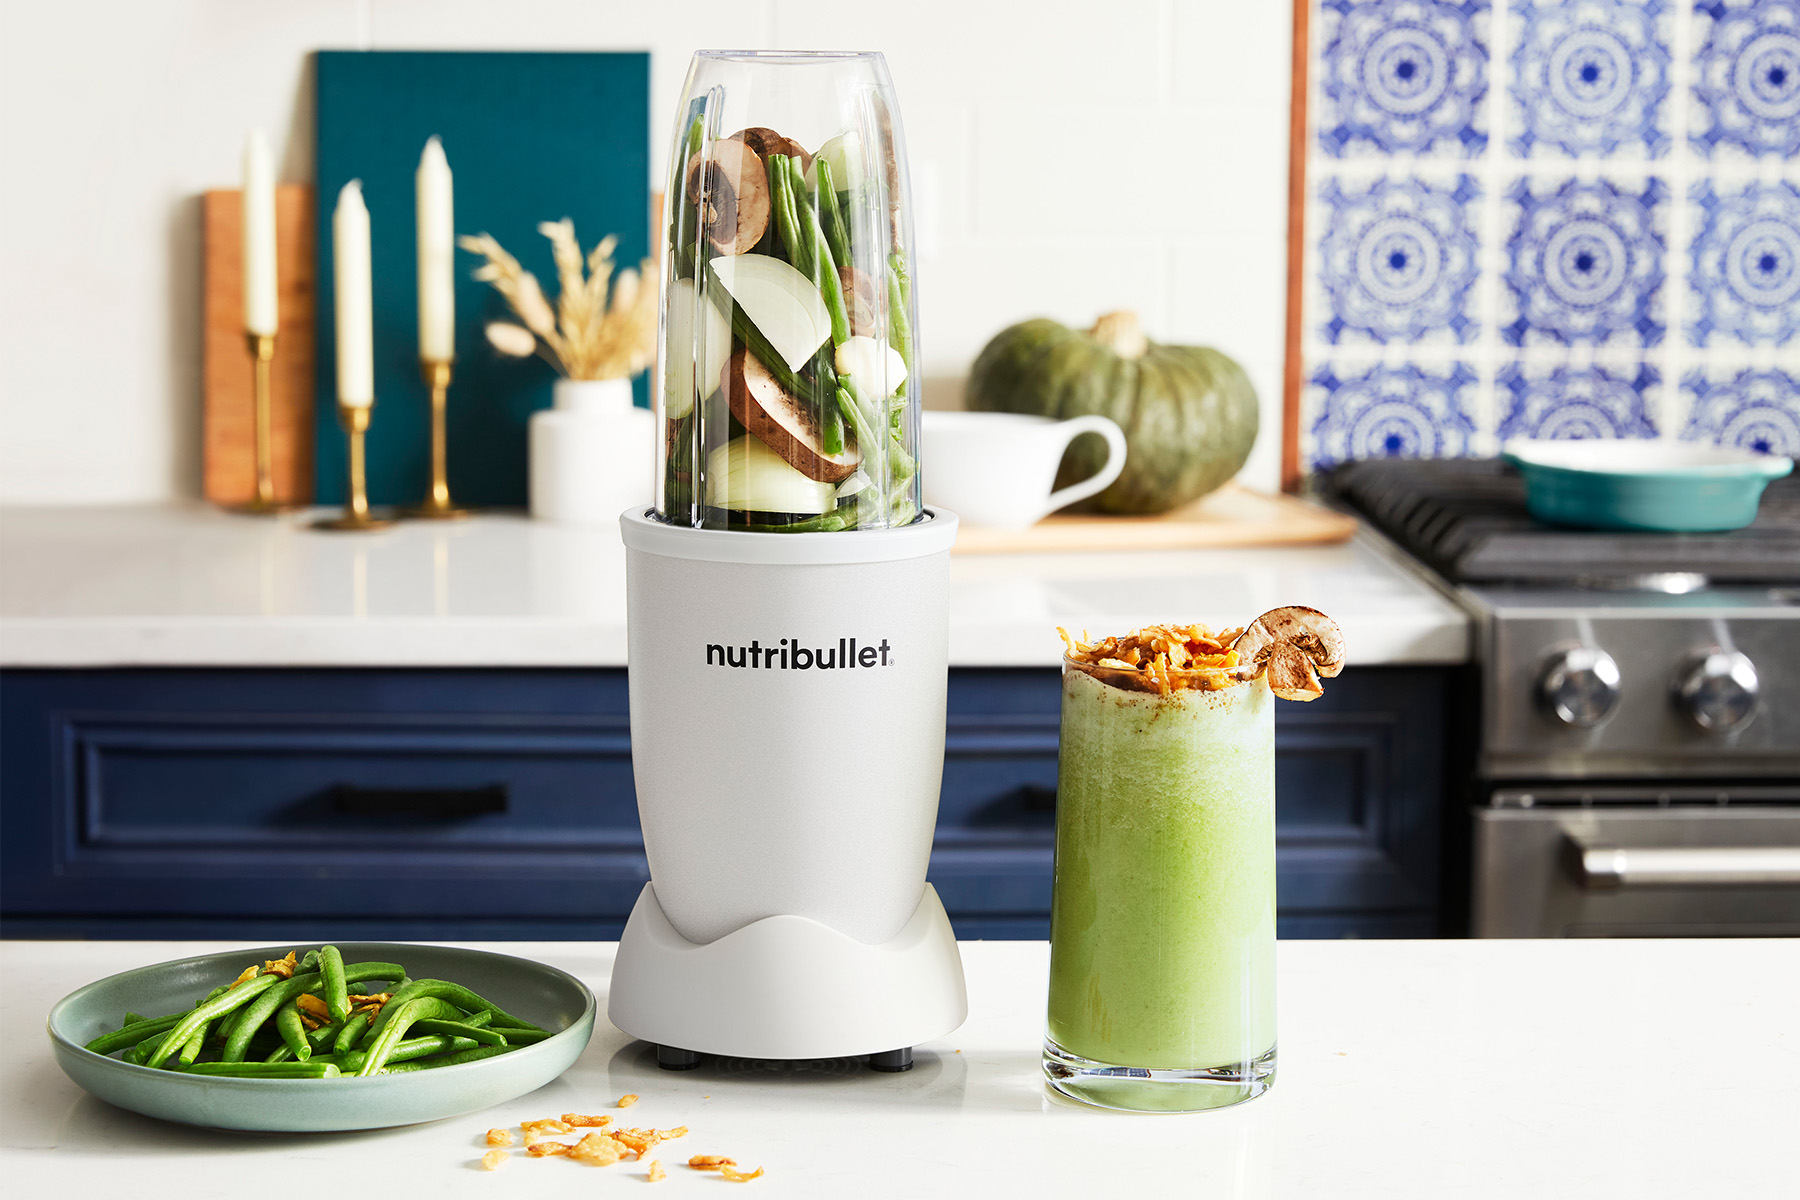 Glass of blended green beans next to a white nutribullet blender and a plate of green beans on a kitchen counter